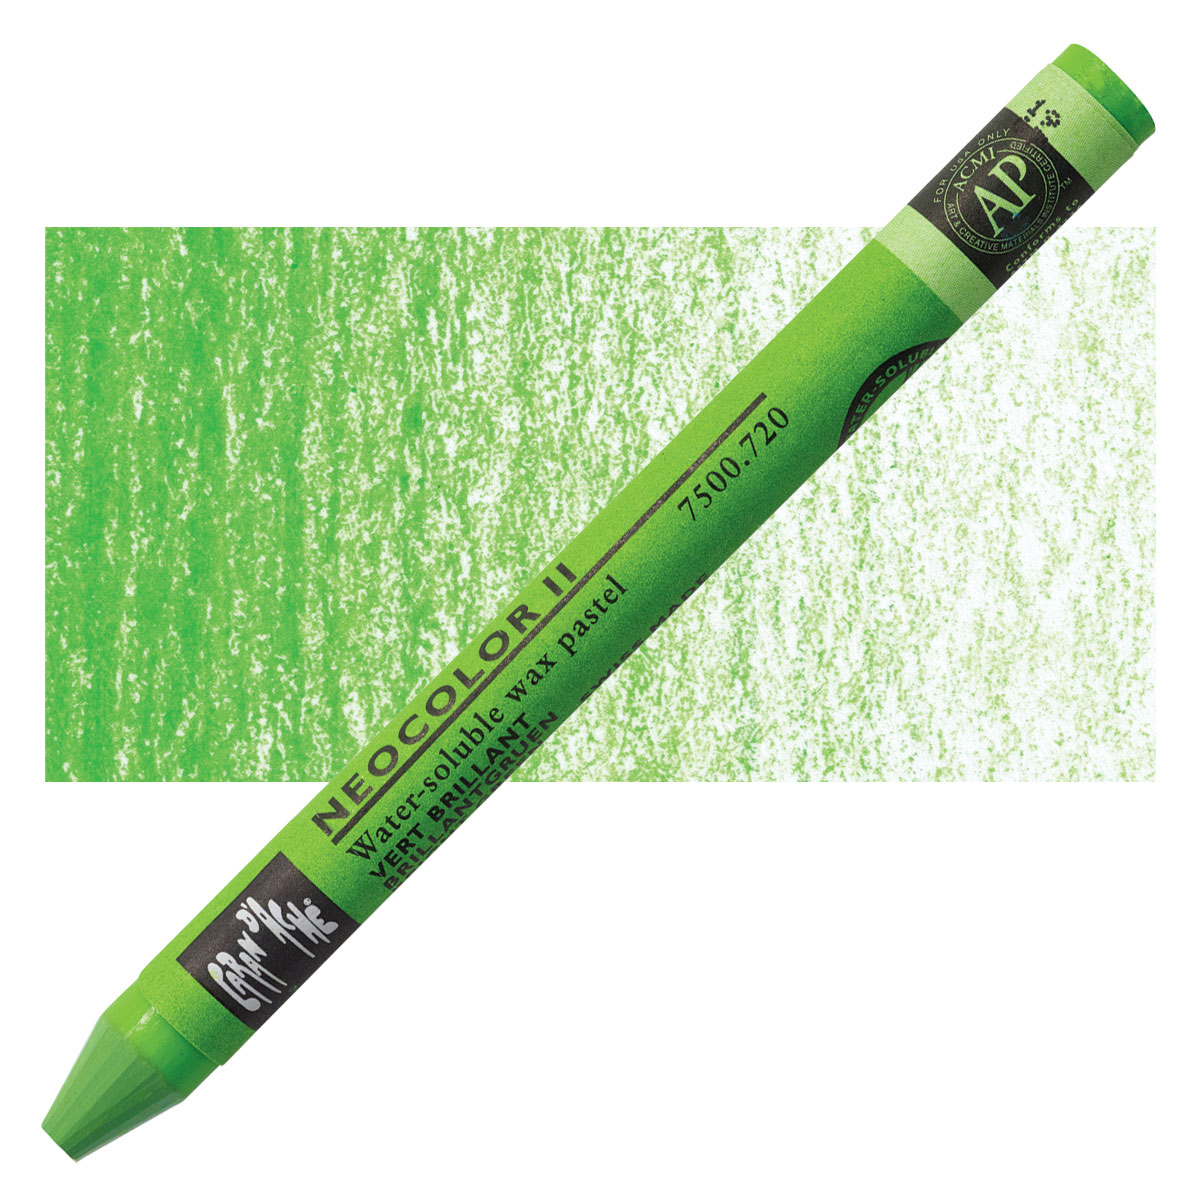 Caran d'Ache Neocolor II Water-Soluble Wax Pastels - Light Olive, No. 245